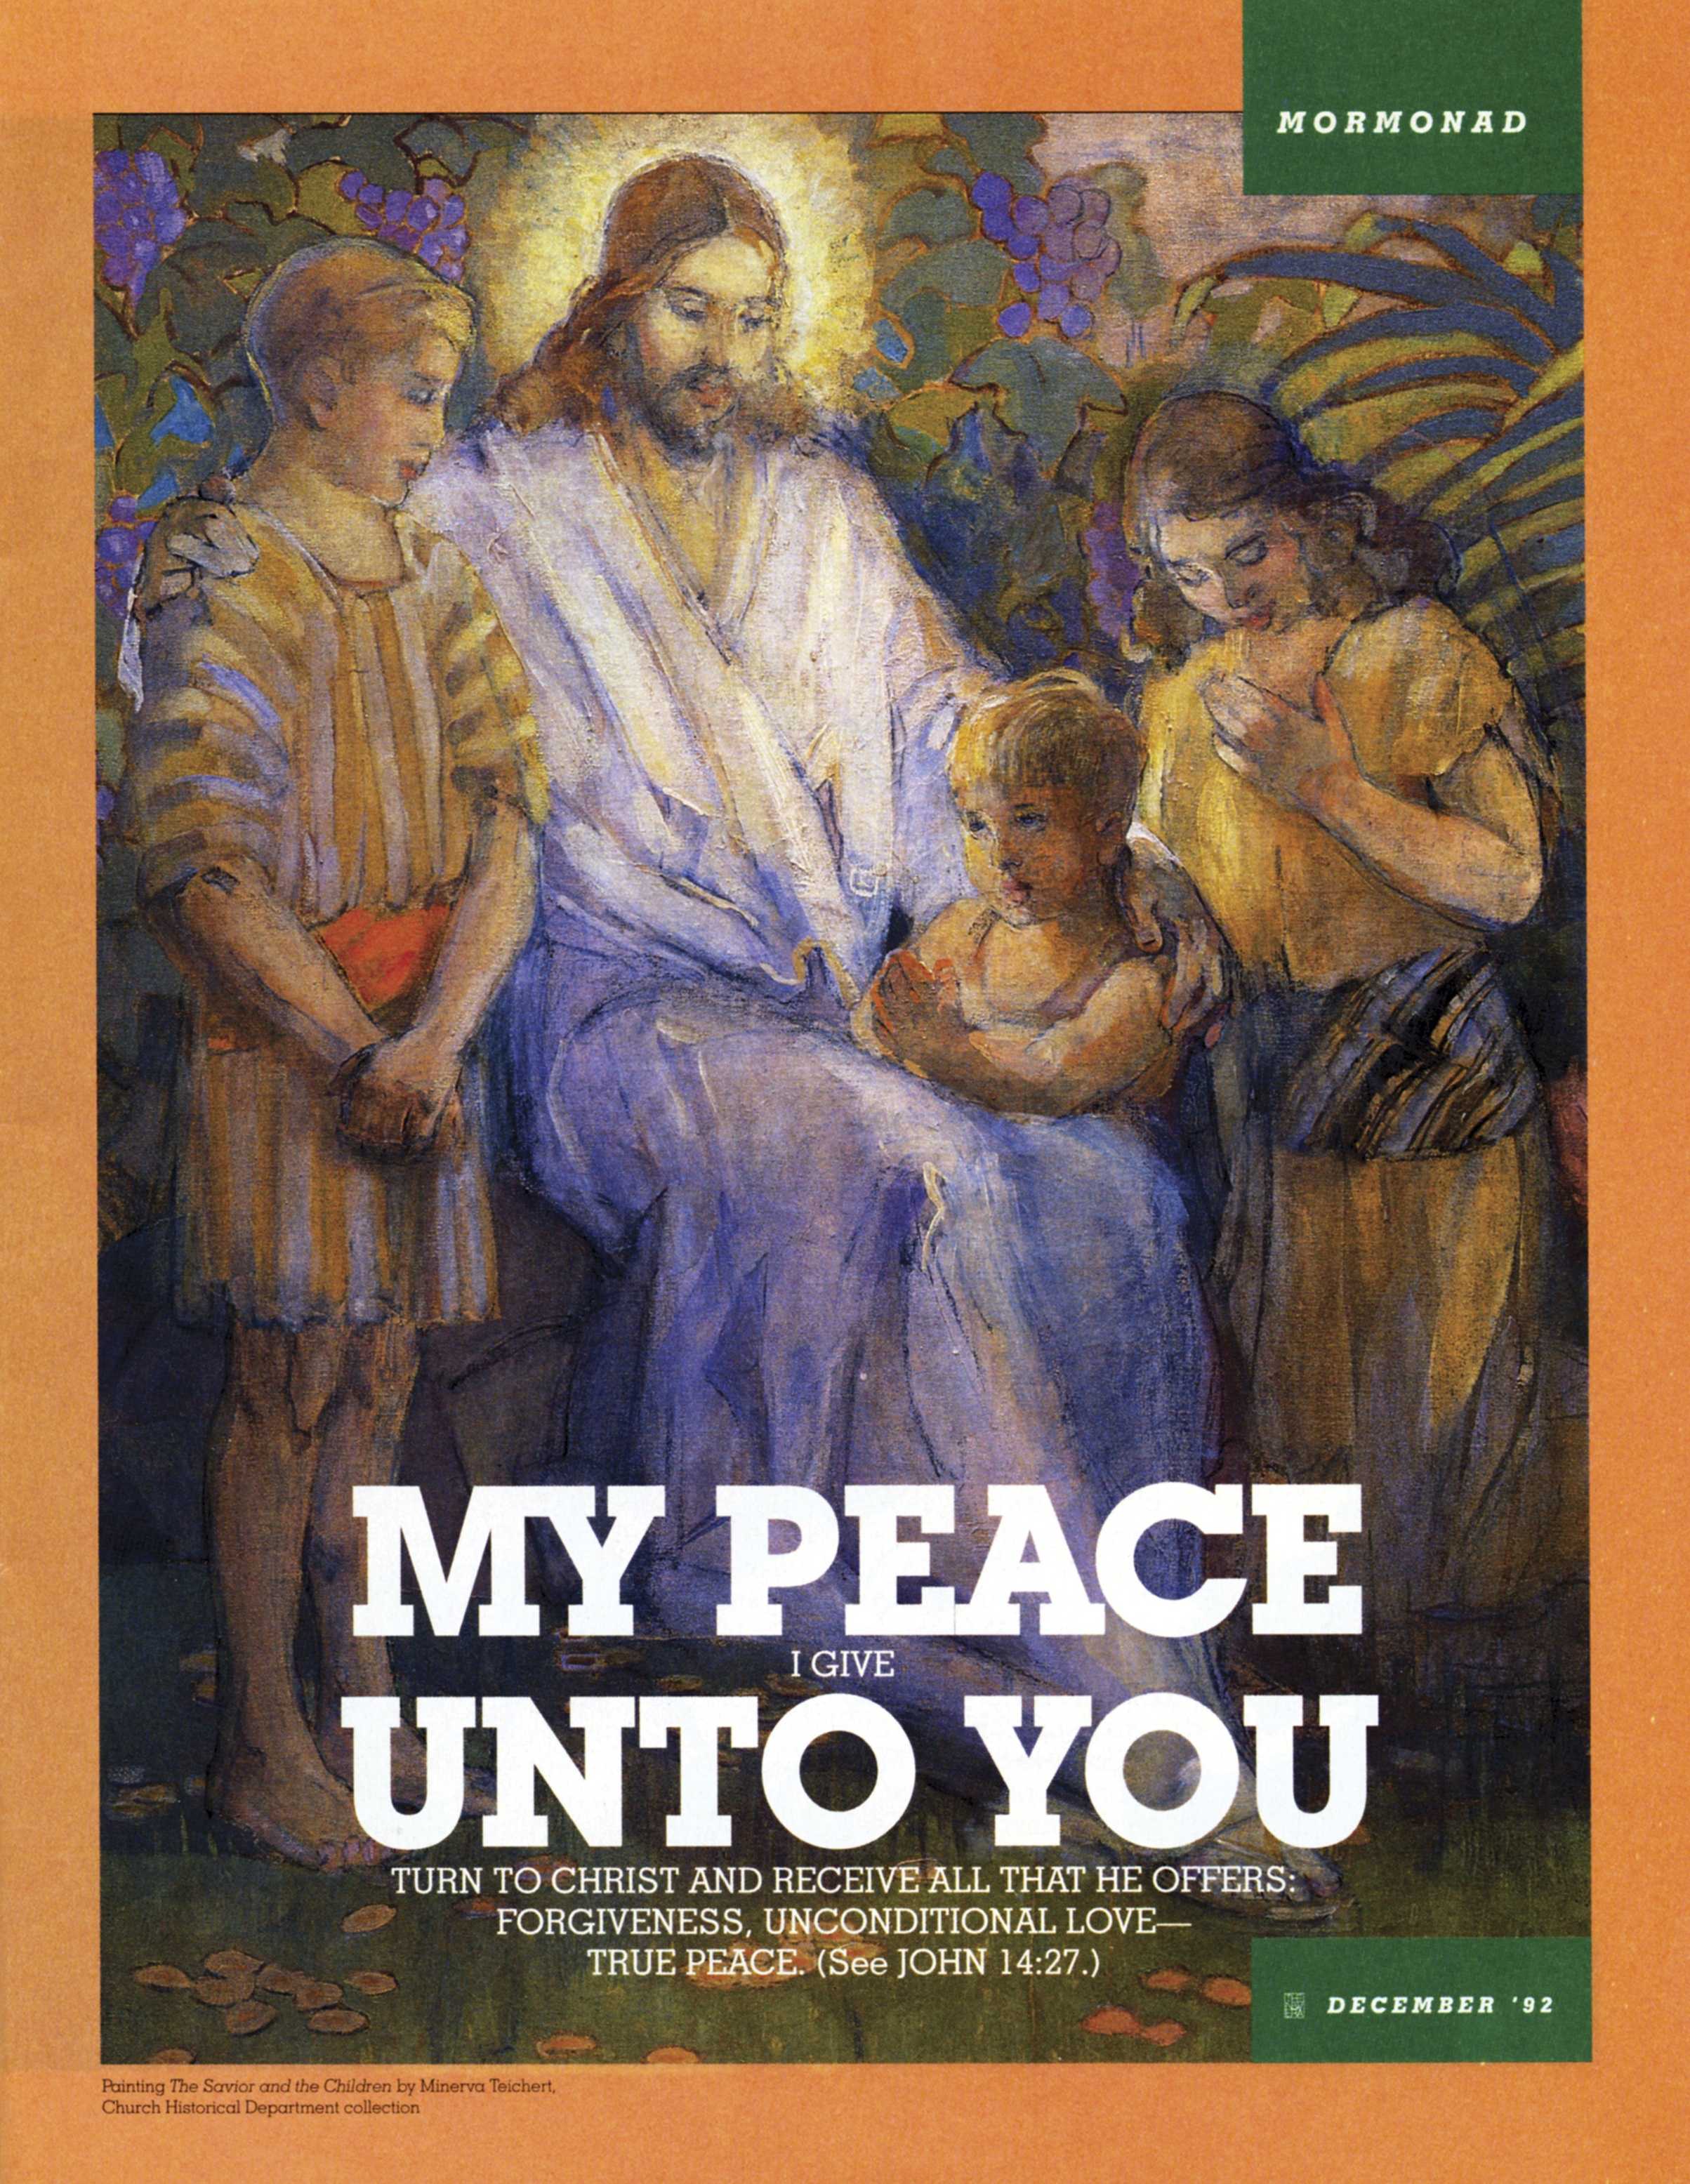 My Peace I Give unto You. Turn to Christ and receive all that he offers: forgiveness, unconditional love—true peace. (See John 14:27.) Dec. 1992 © undefined ipCode 1.